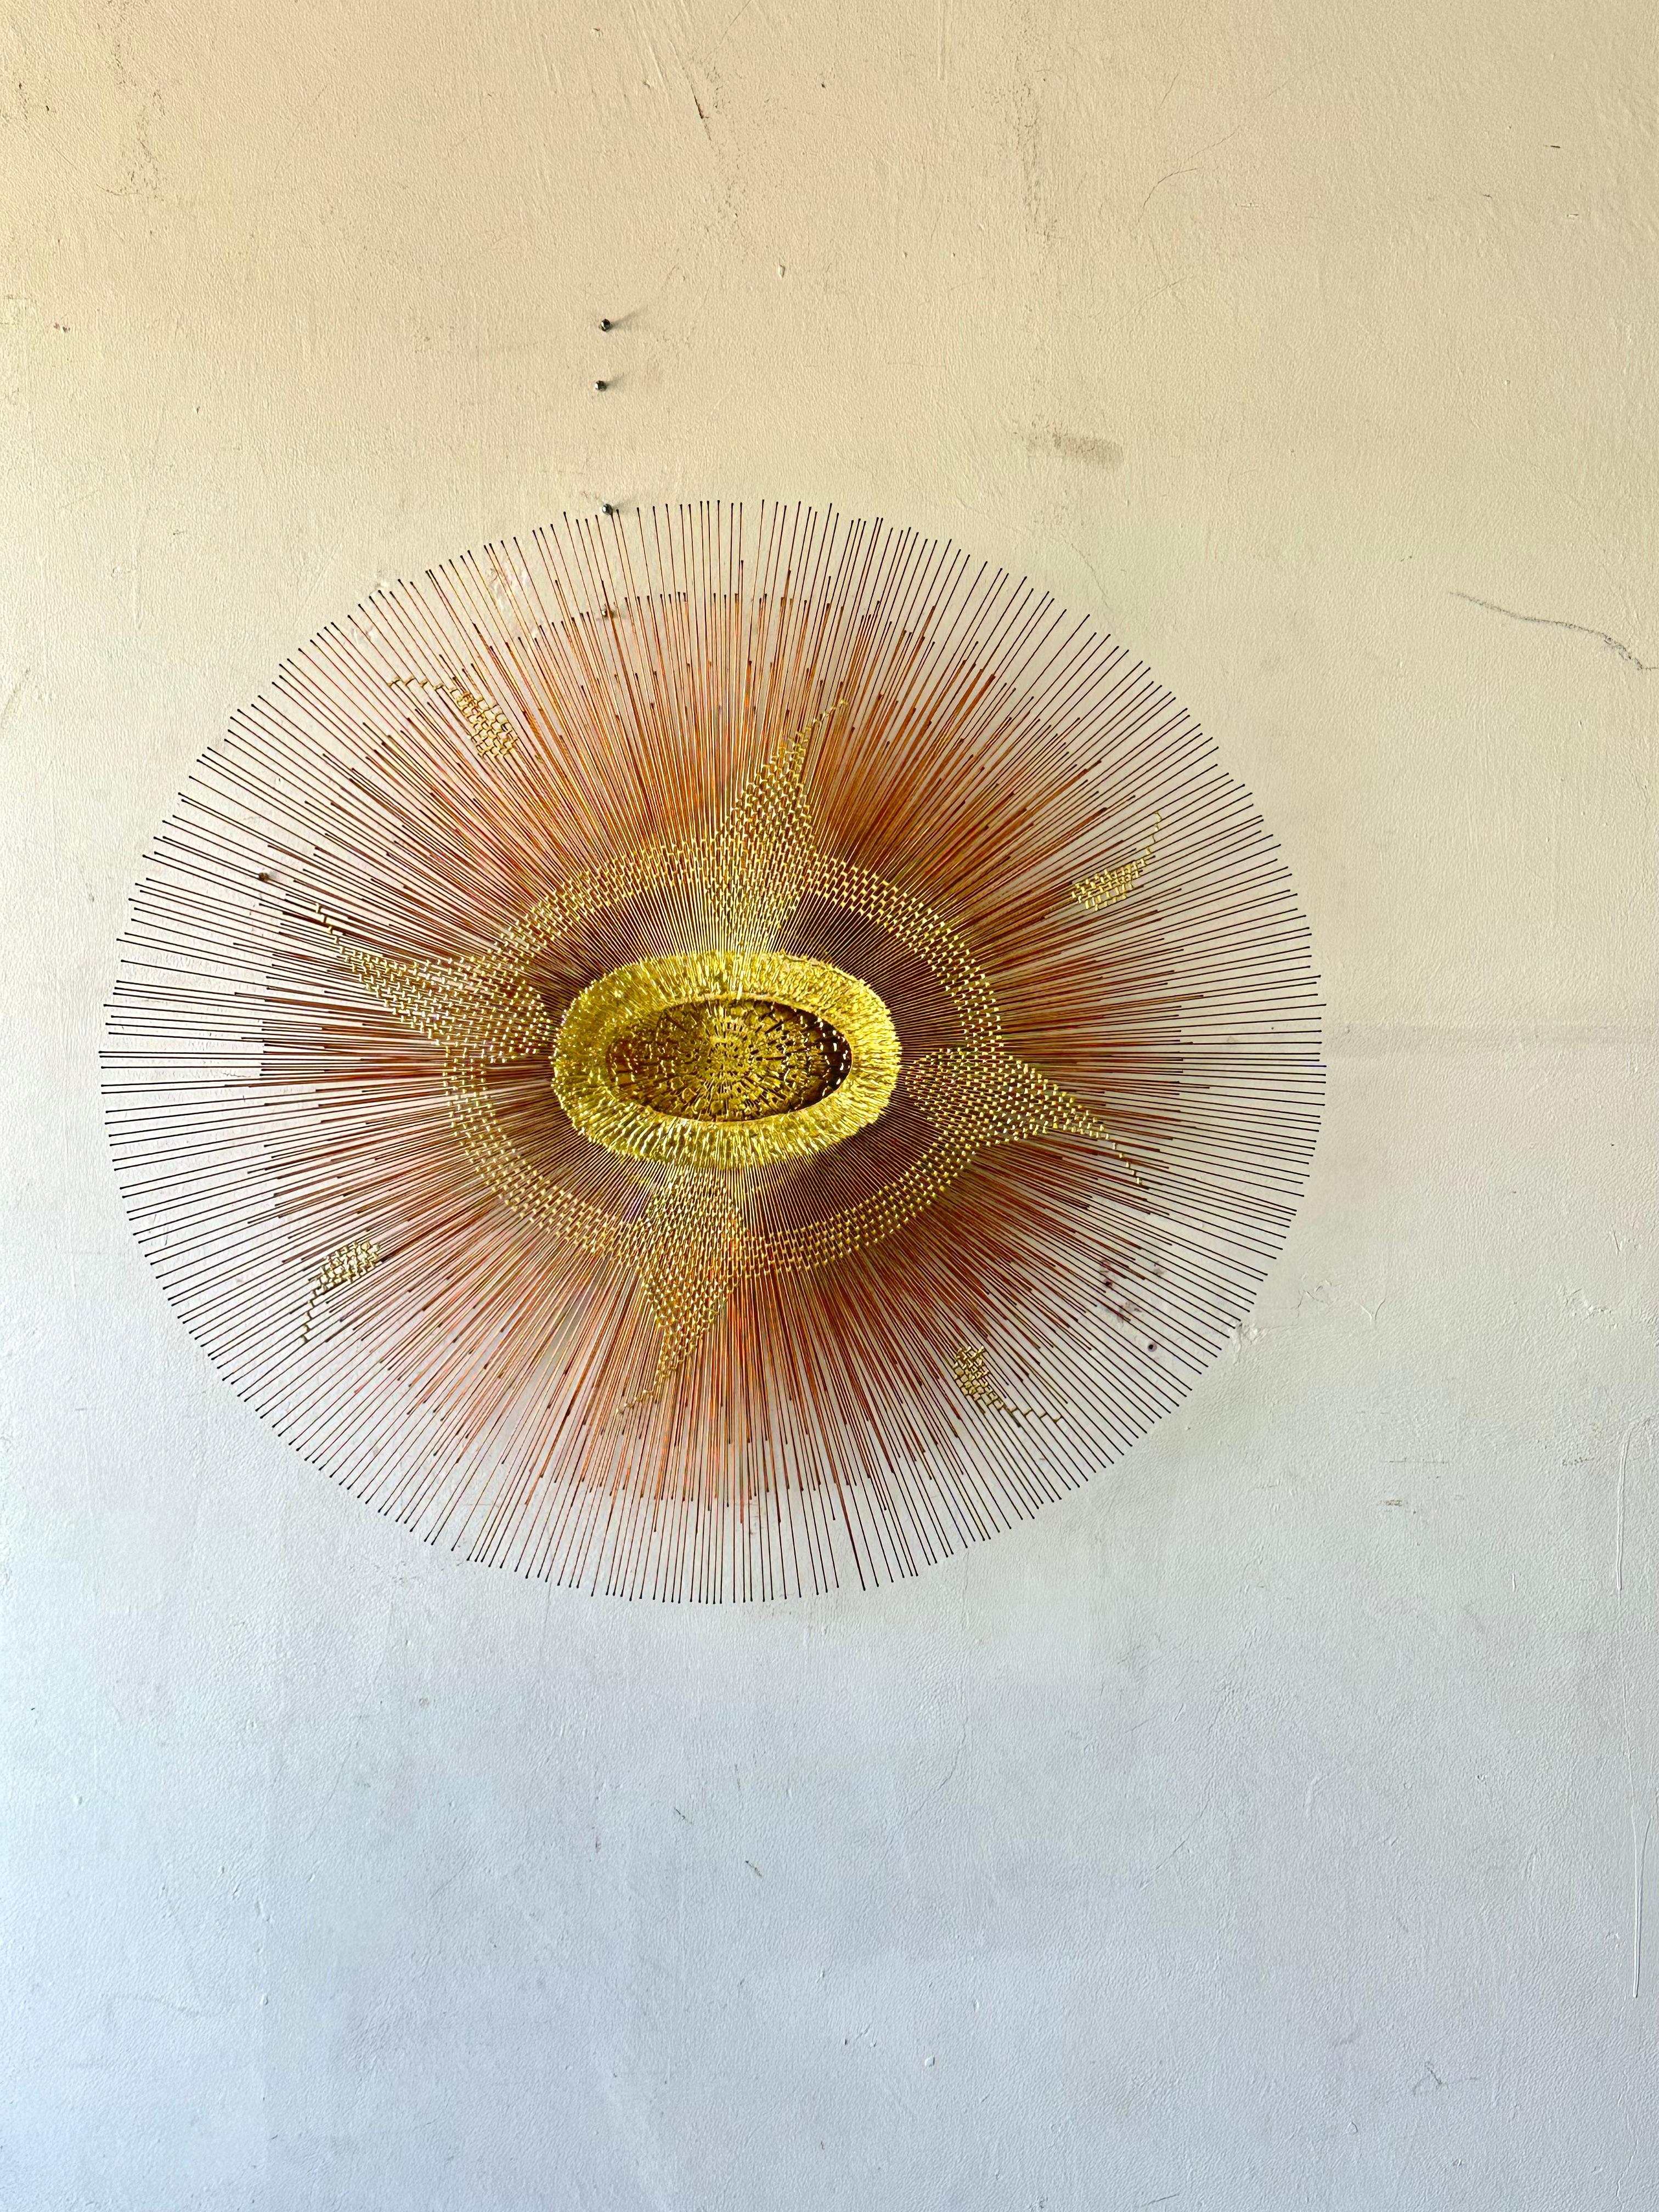 Spectacular Mid-Century Modern large scale sunburst sculpture, circa 1970s. This statement piece is made of metal with 3 different colors: copper, bronze and gold.featuring double layer rods in different lengths. A dramatic focal point to any space